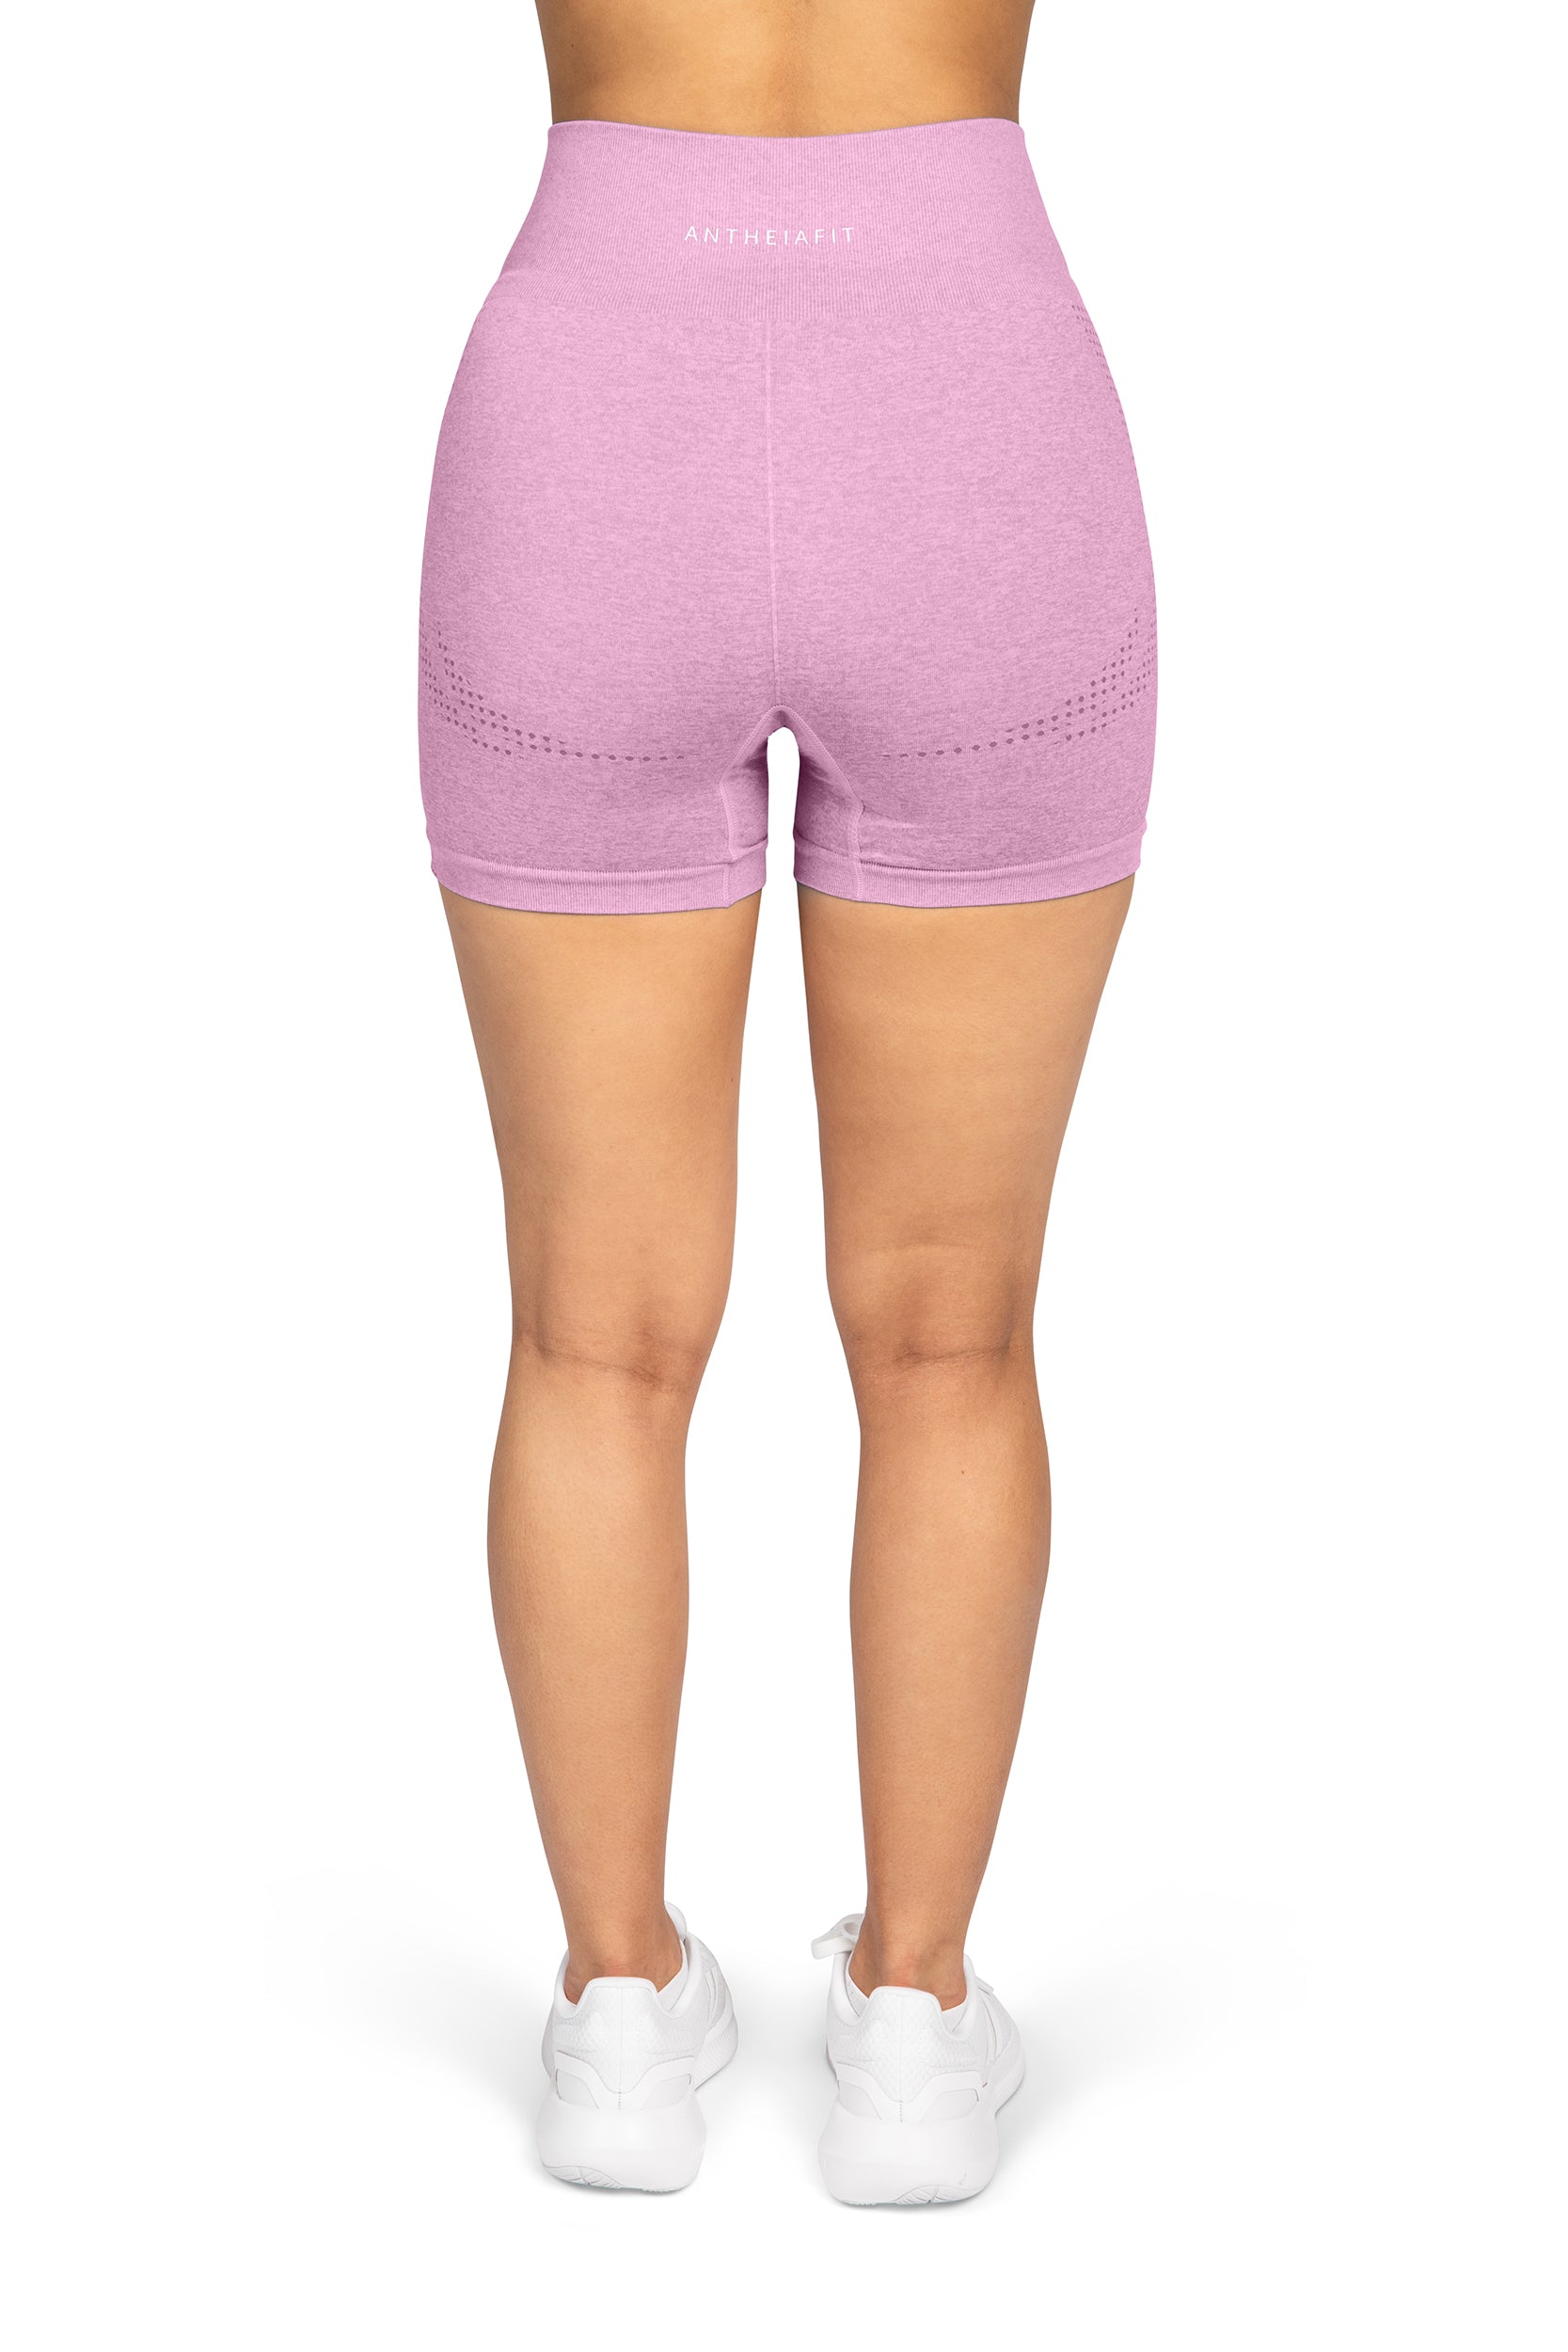 Easy Sprint 6” *Seamless Shorts in Taffy Pink – EASY ACTIVE